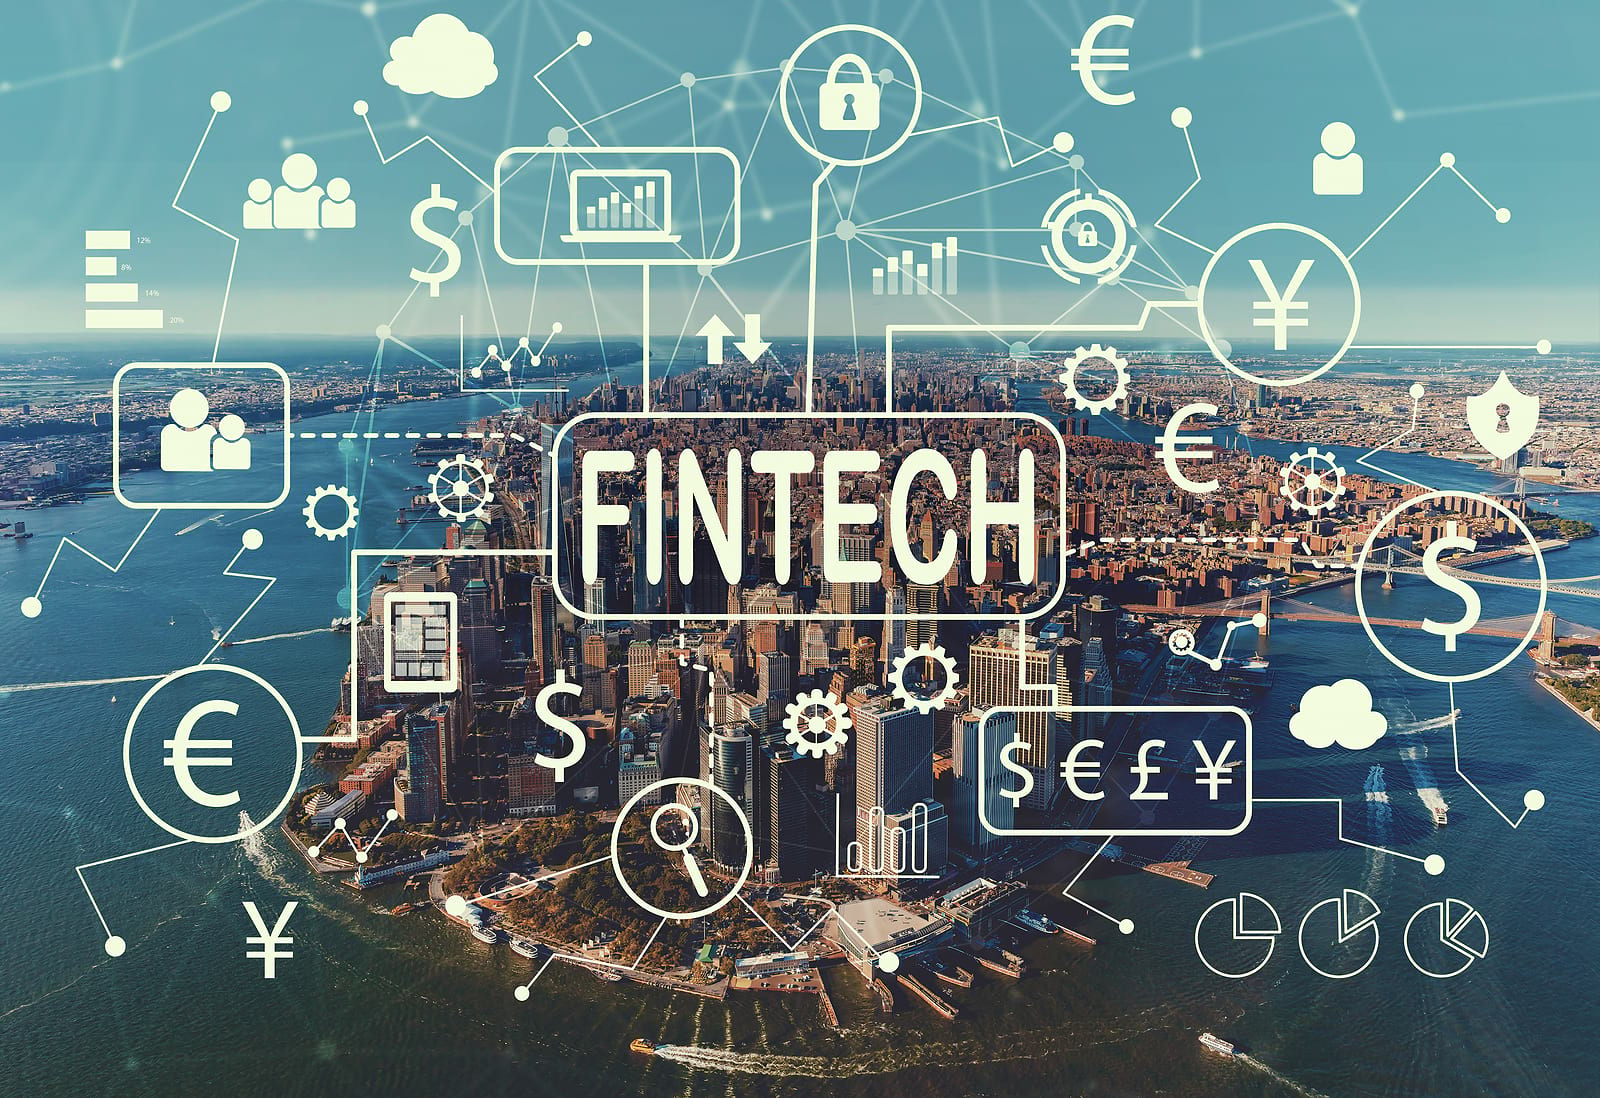 What are 4 categories of fintech?